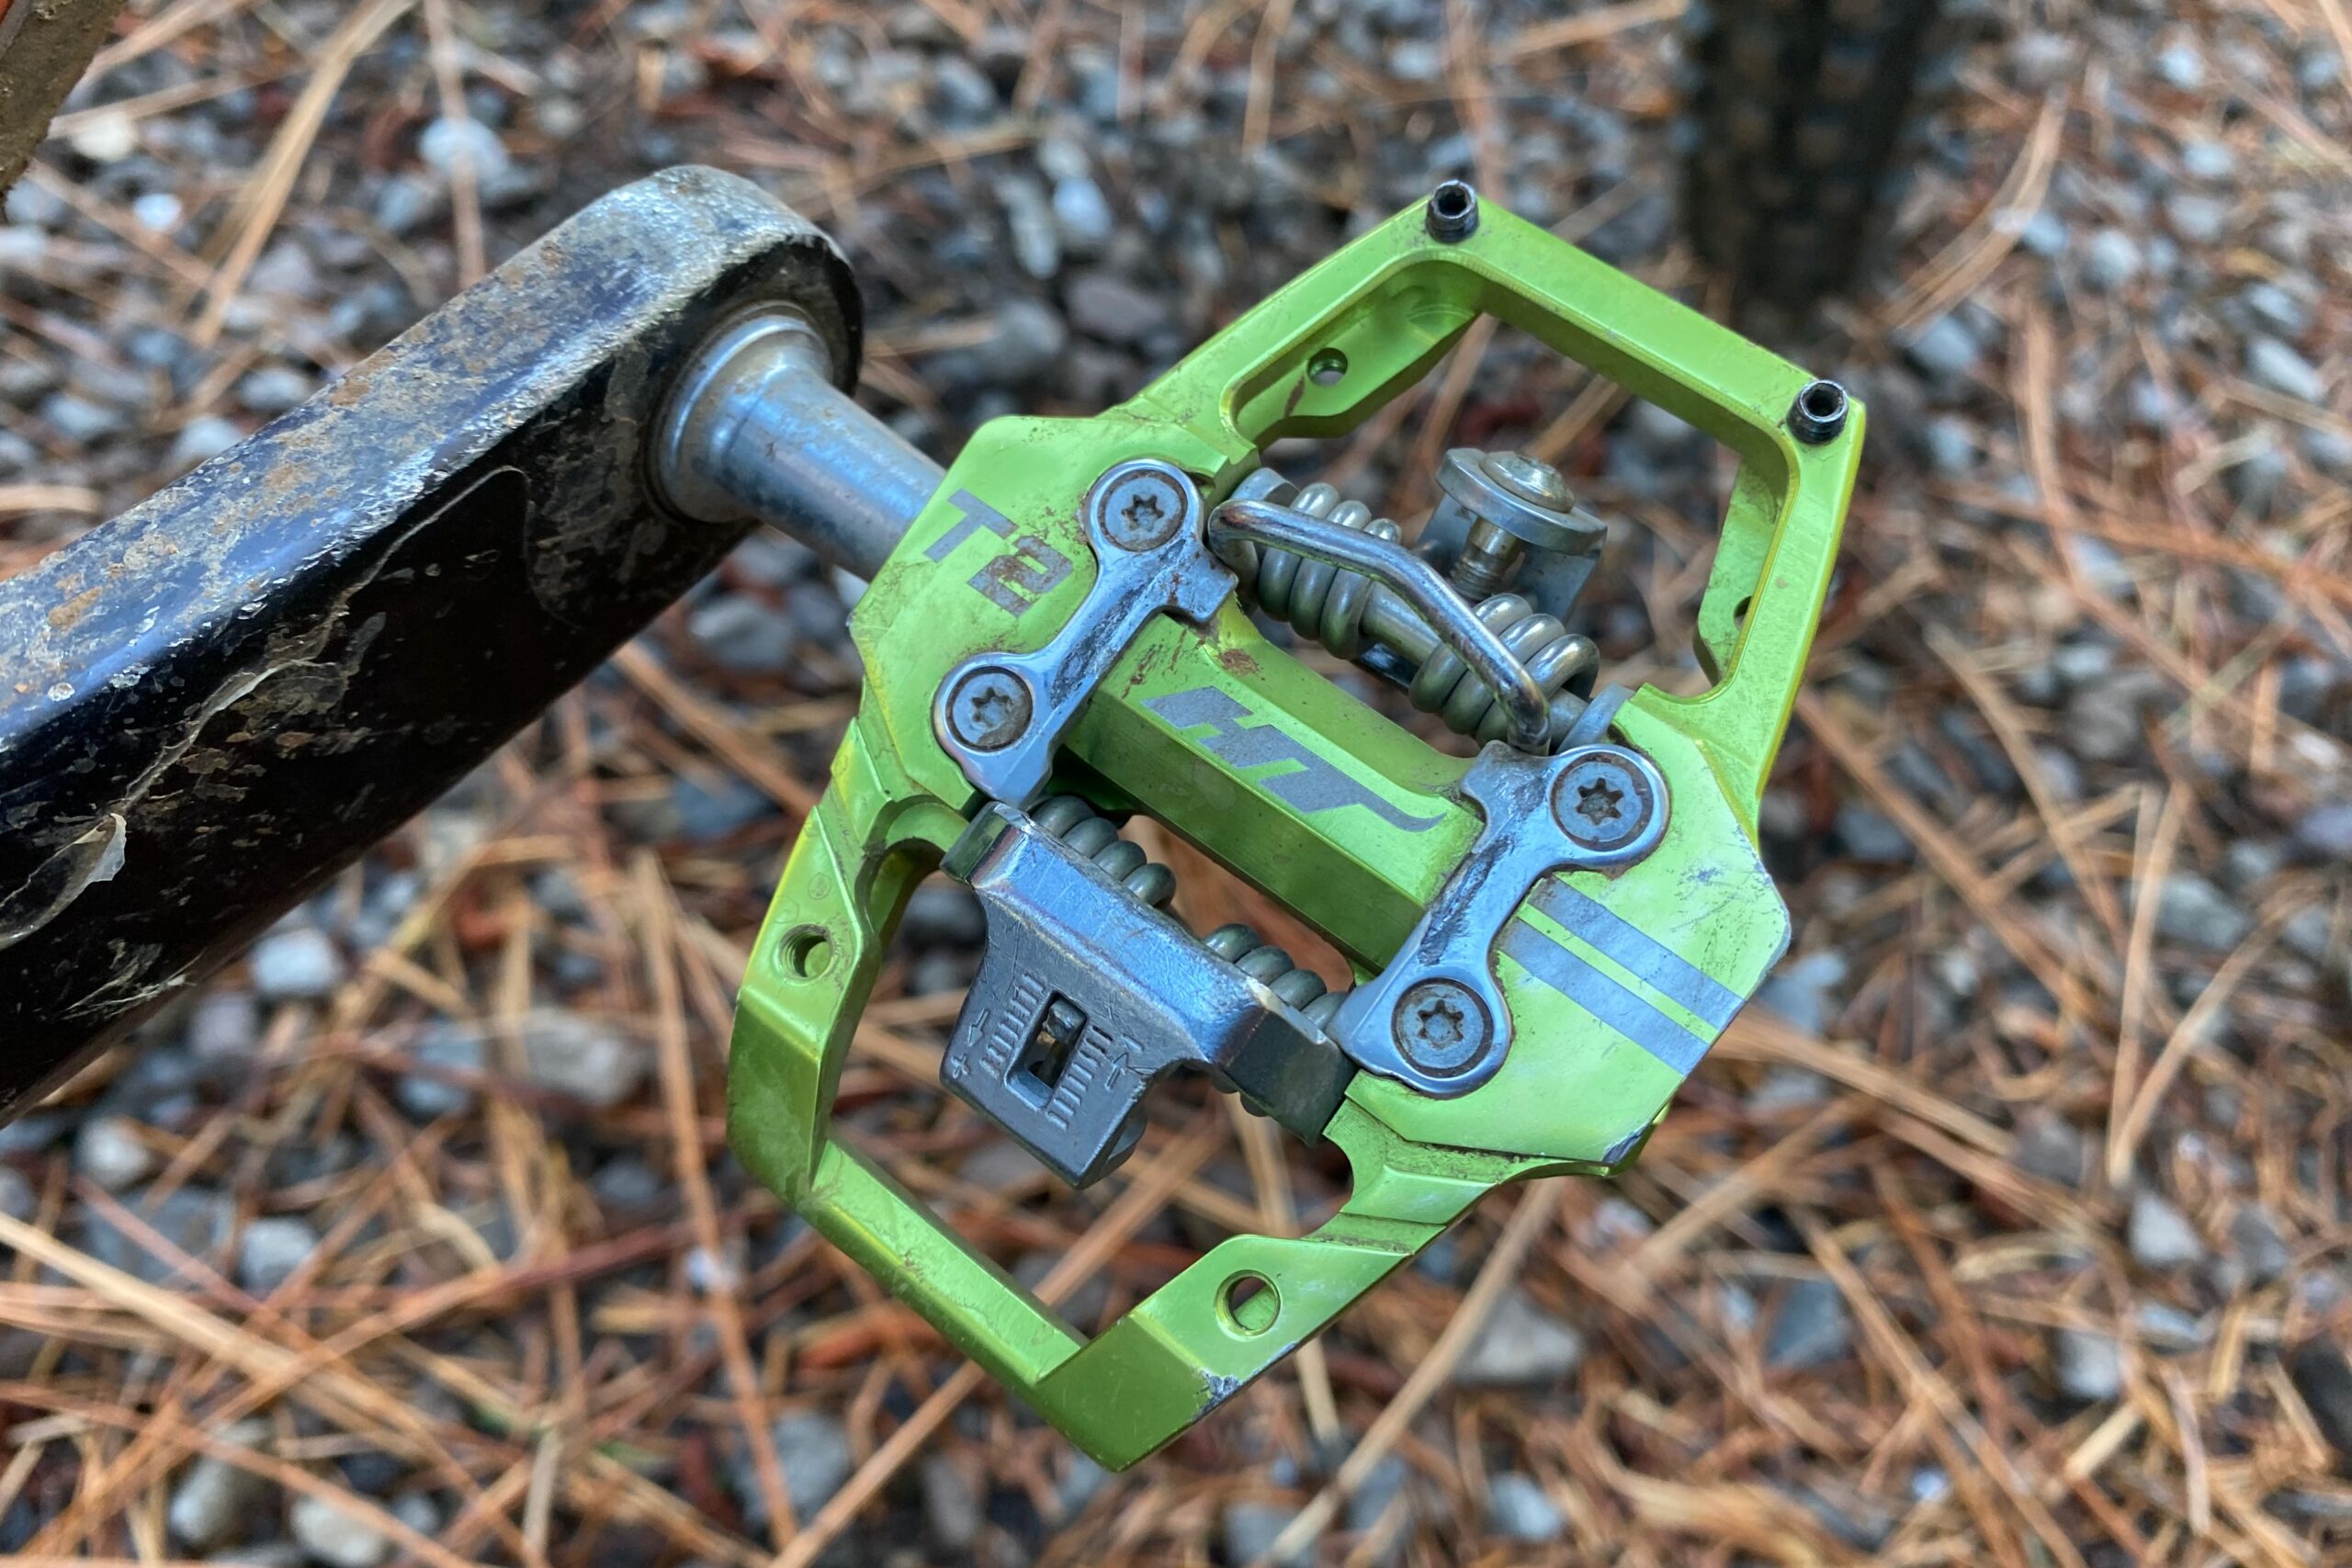 The HT T2 pedals